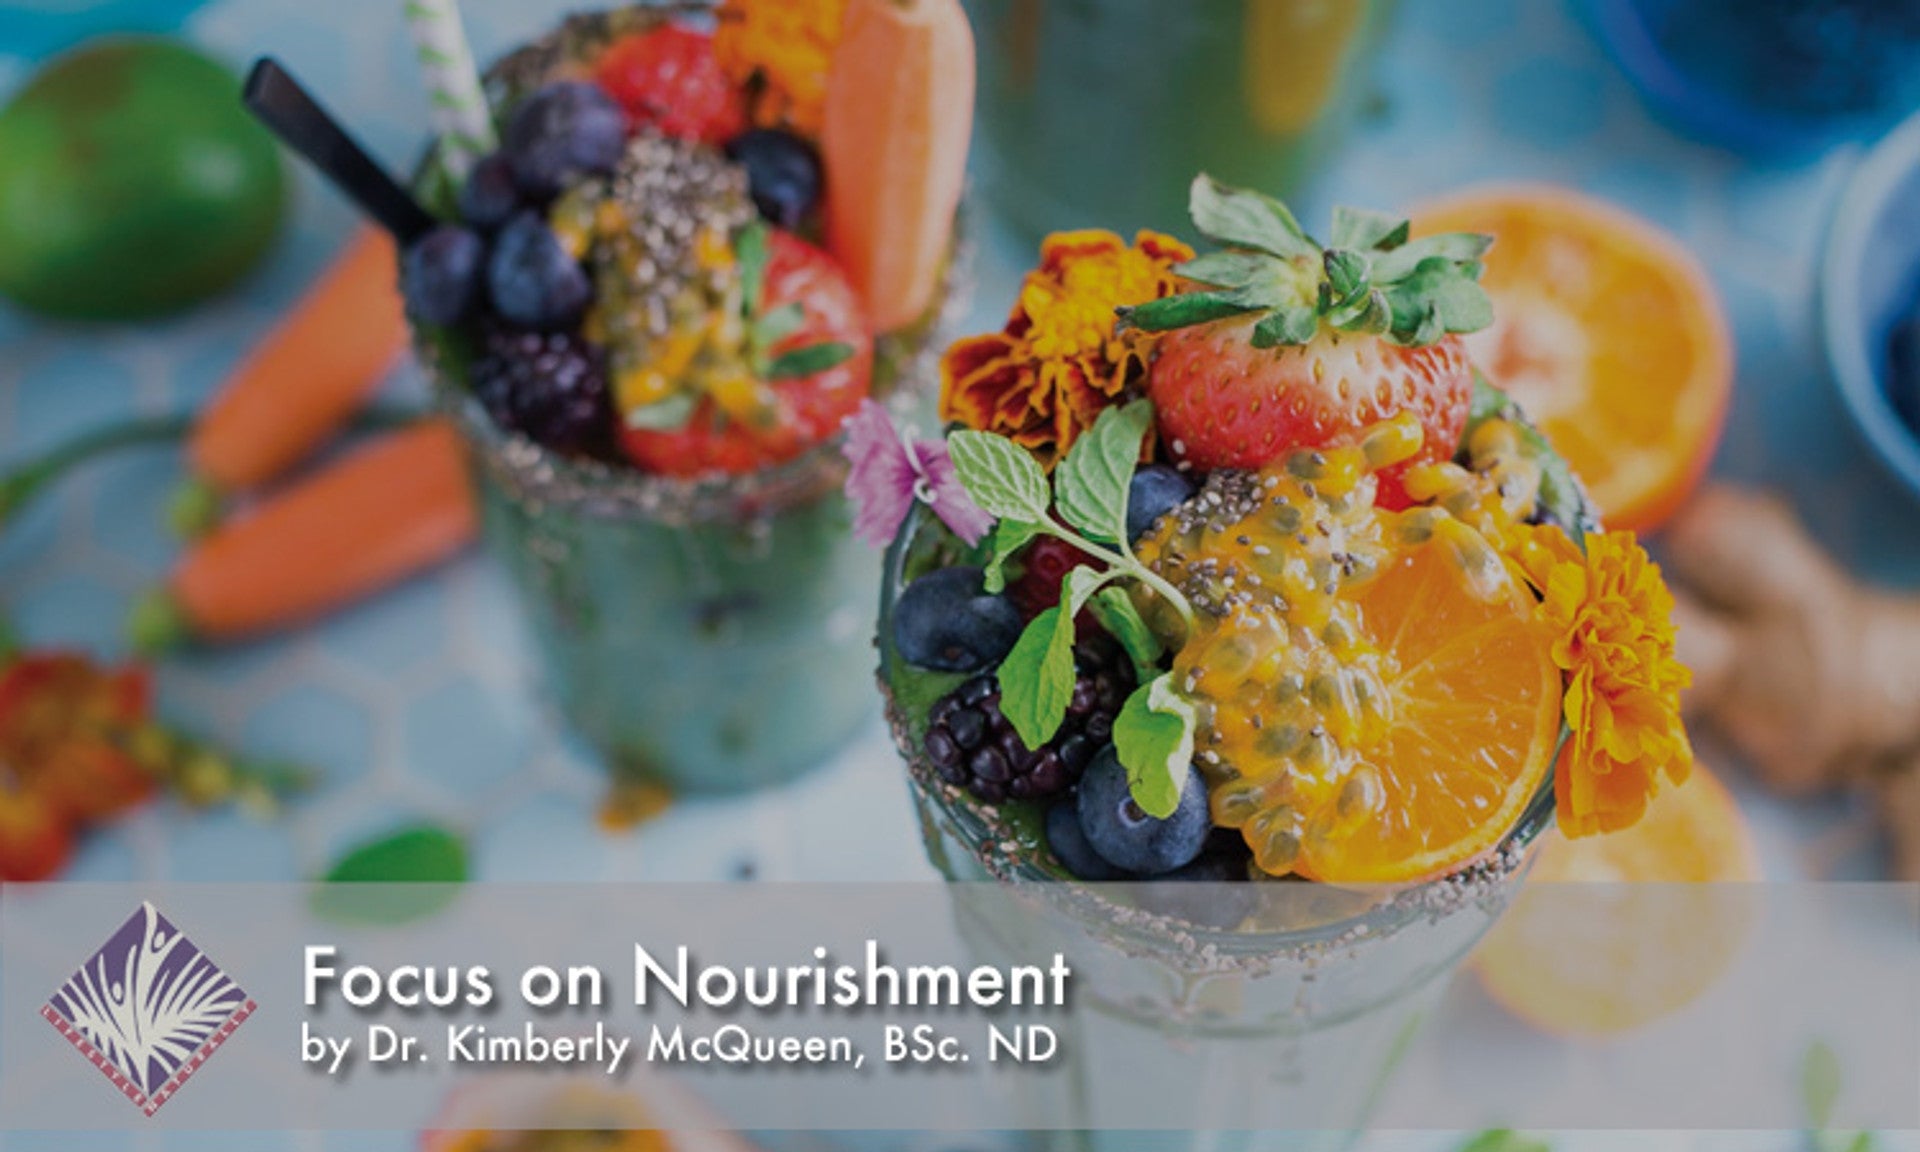 Focus on Nourishment in the New Year